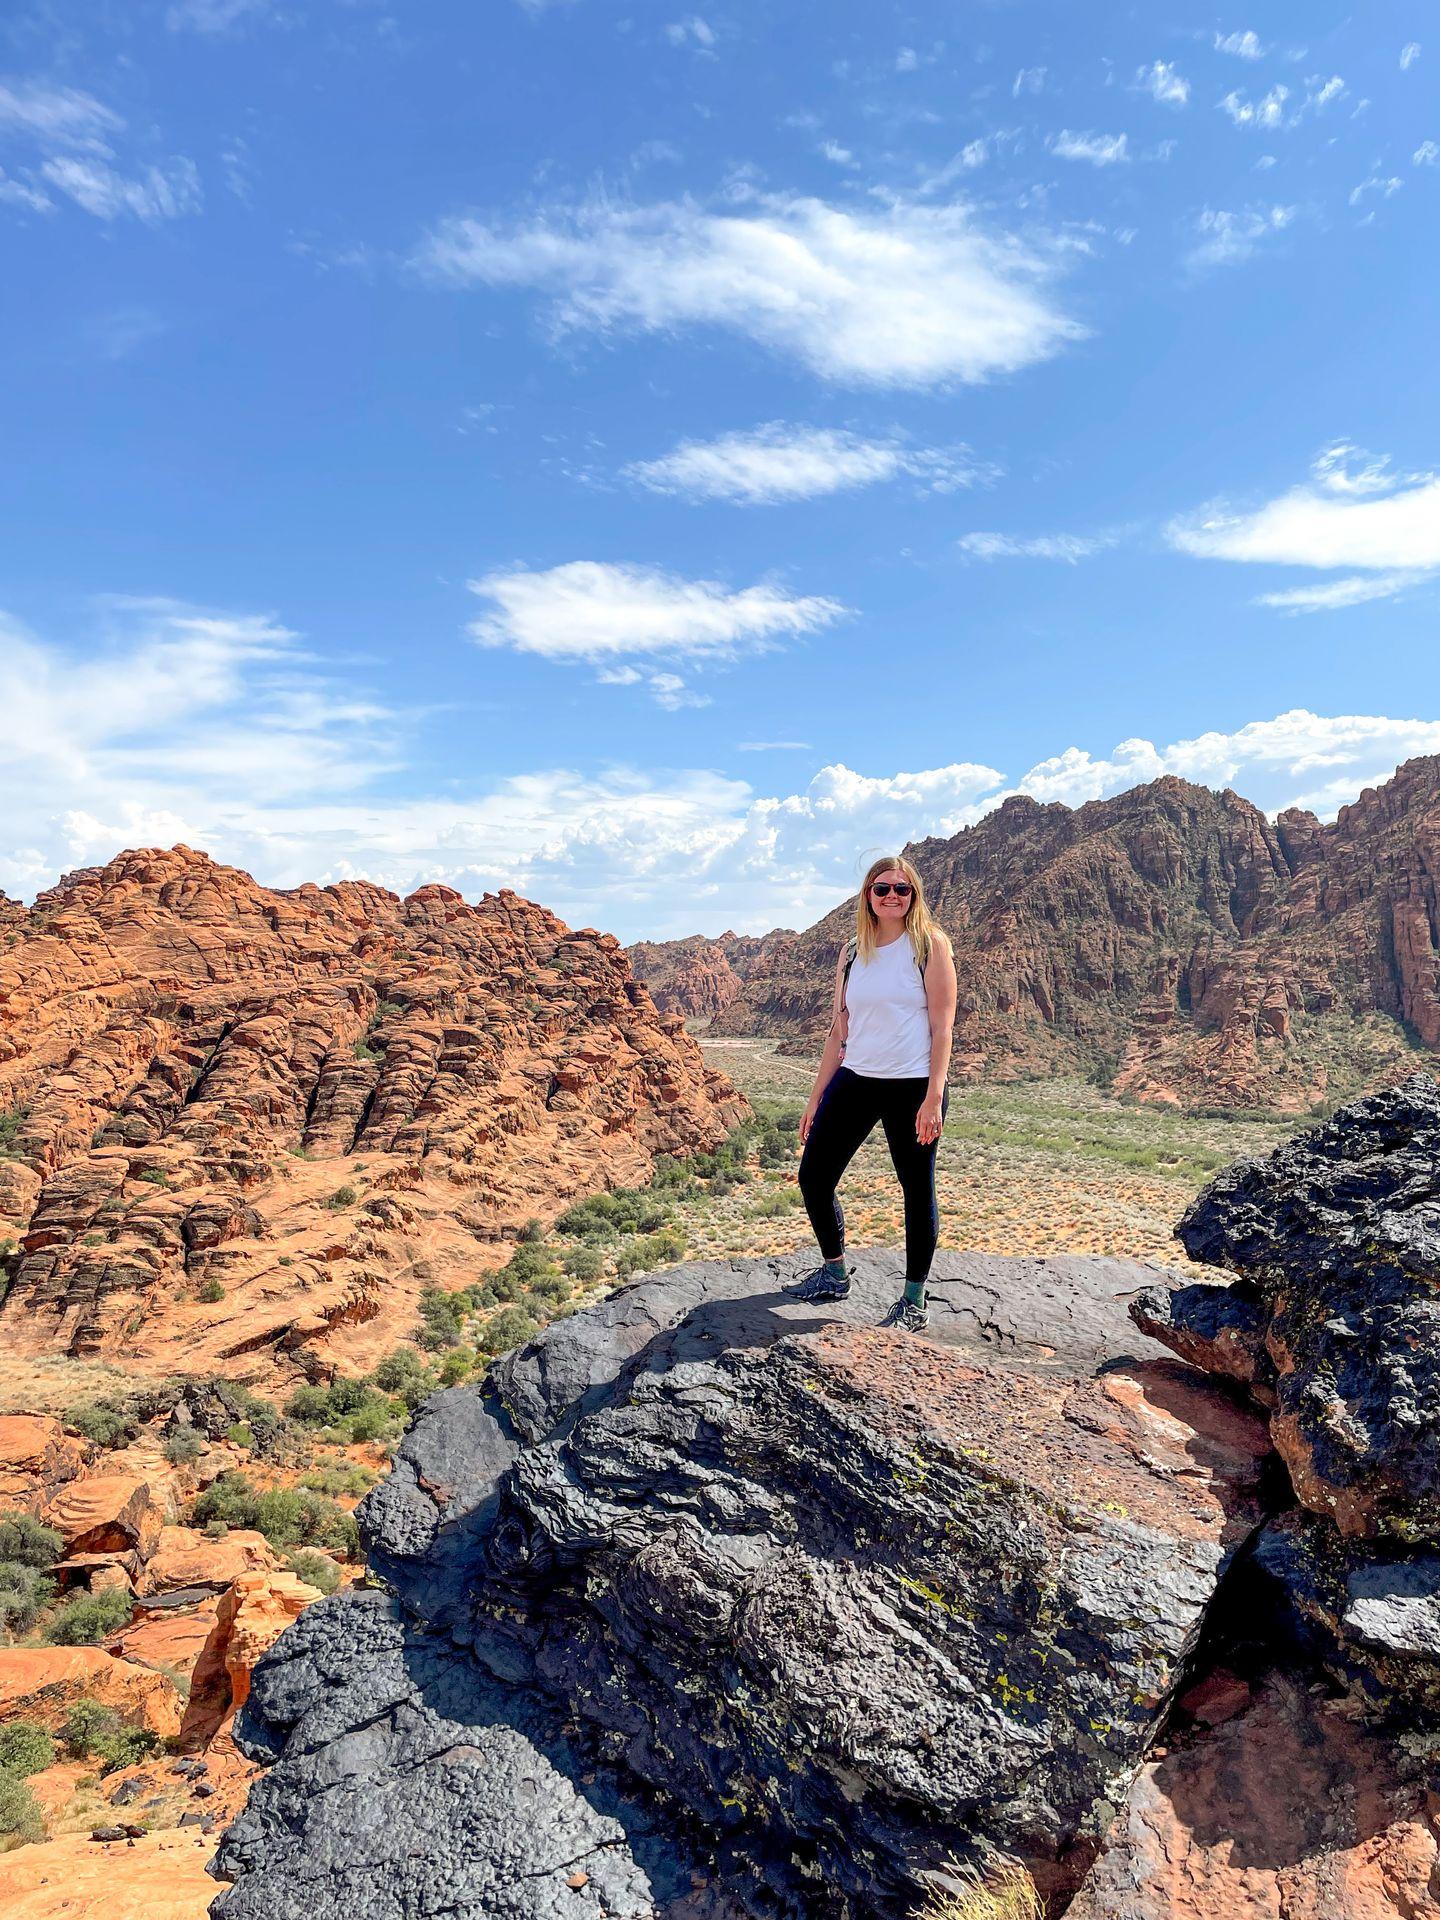 Lydia standing on a black rock with an orange canyon behind her.